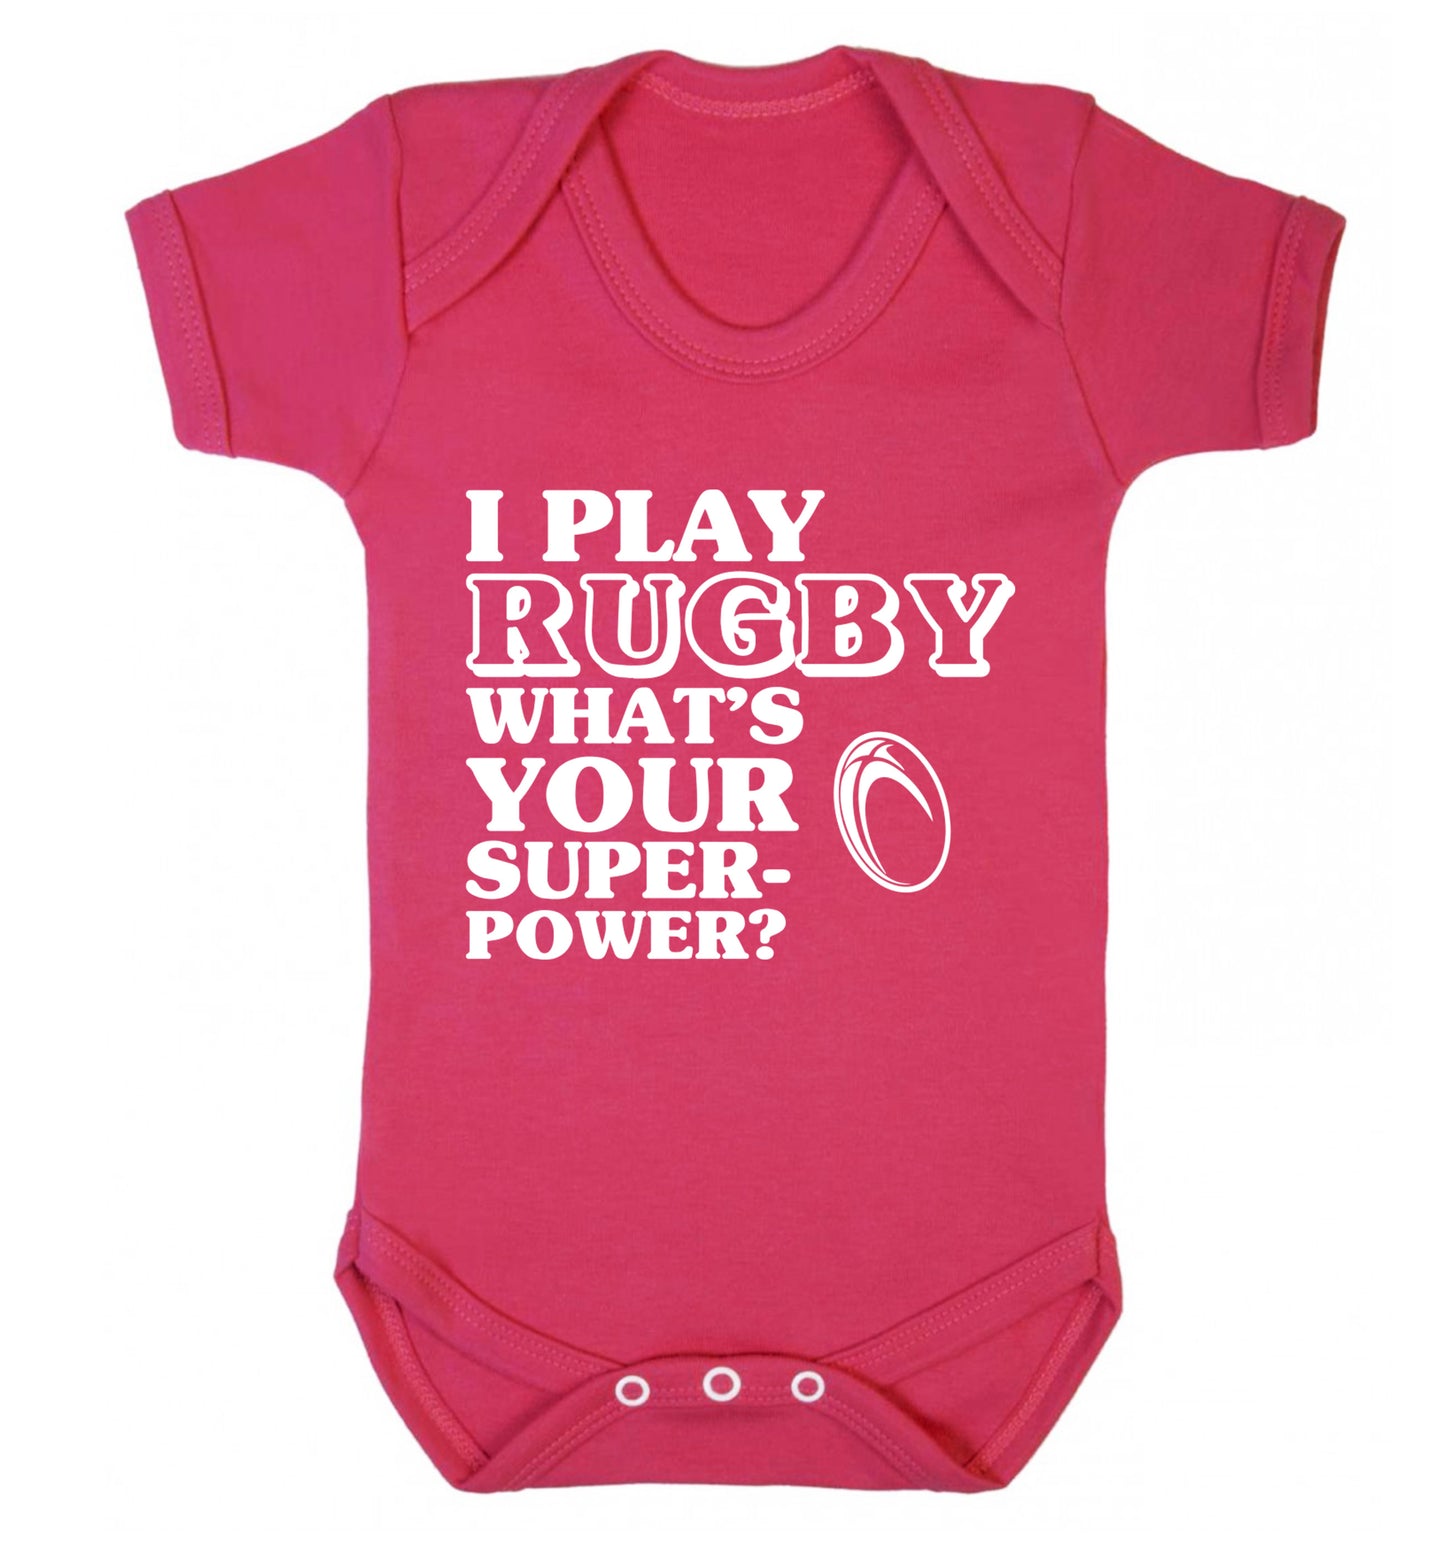 I play rugby what's your superpower? Baby Vest dark pink 18-24 months